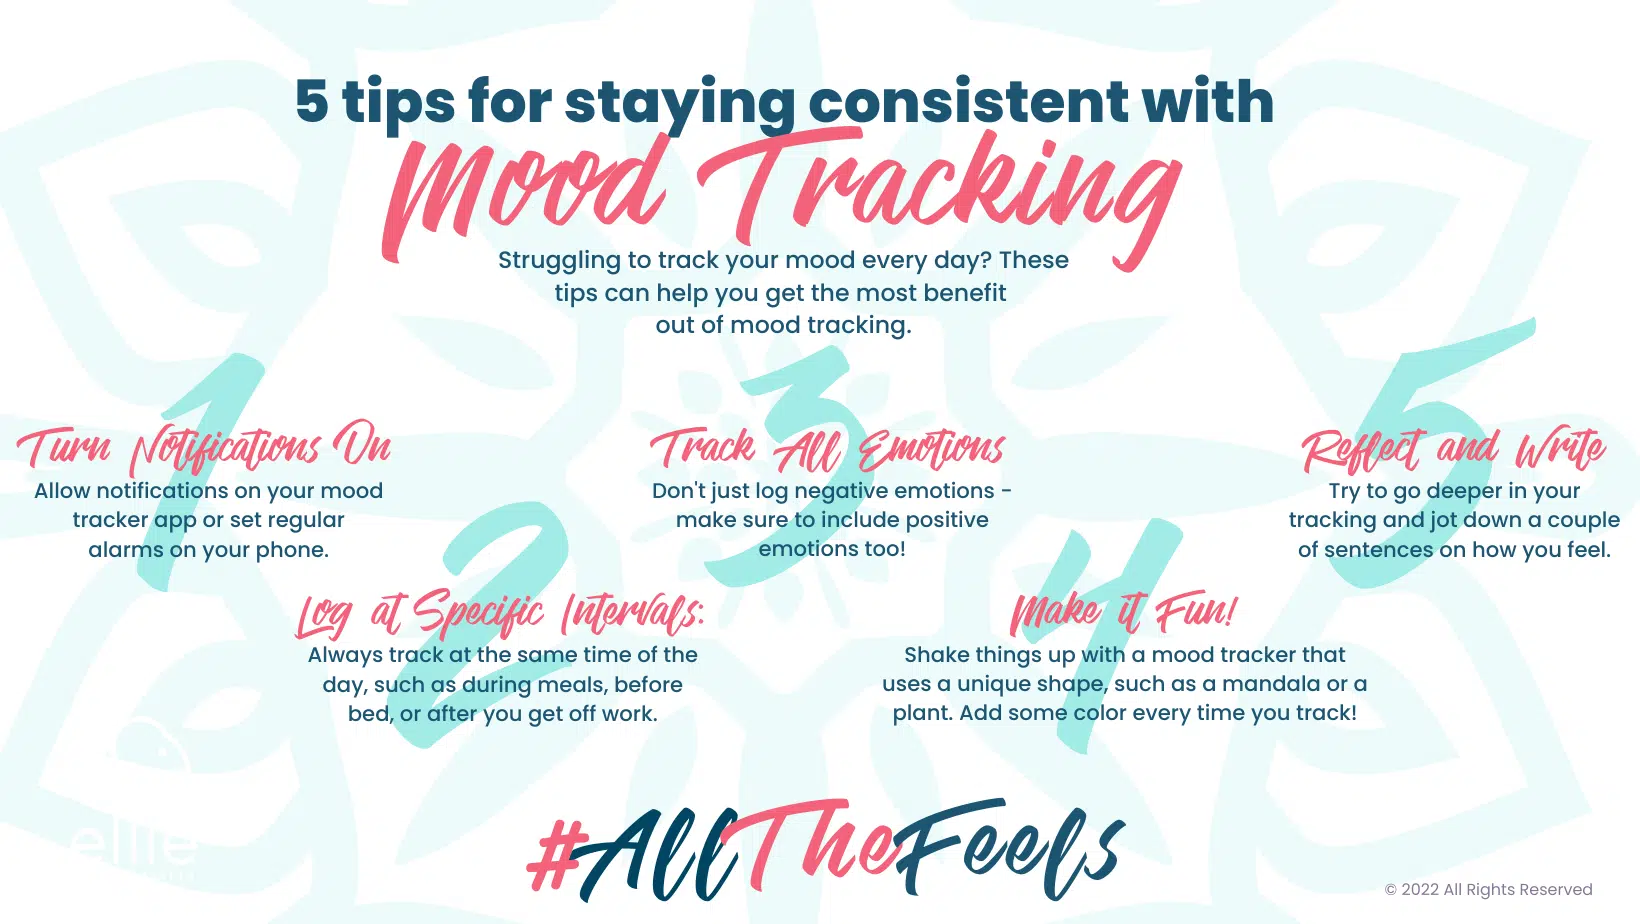 5 Tips for Staying Consistent with Mood Tracking infographic